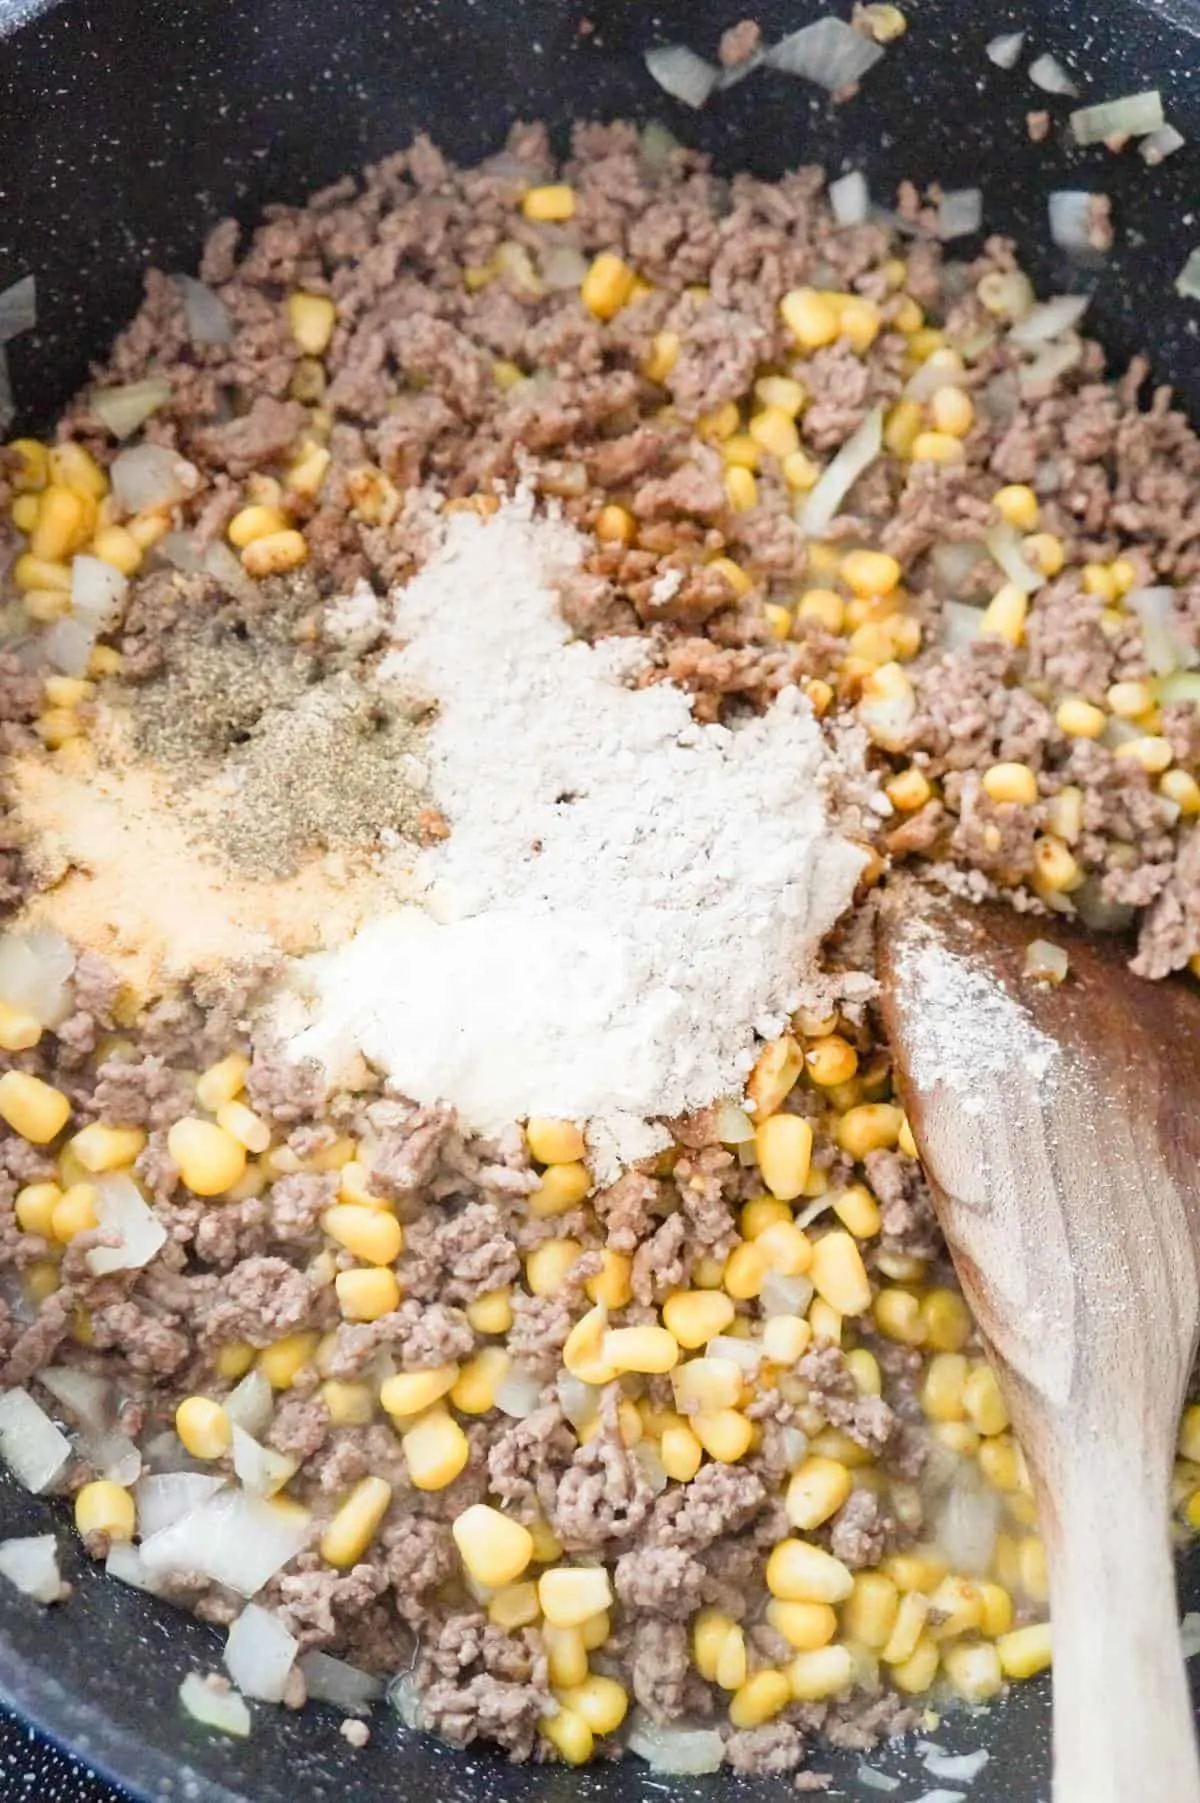 gravy mix and spices on top of ground beef and corn mixture in a saute pan